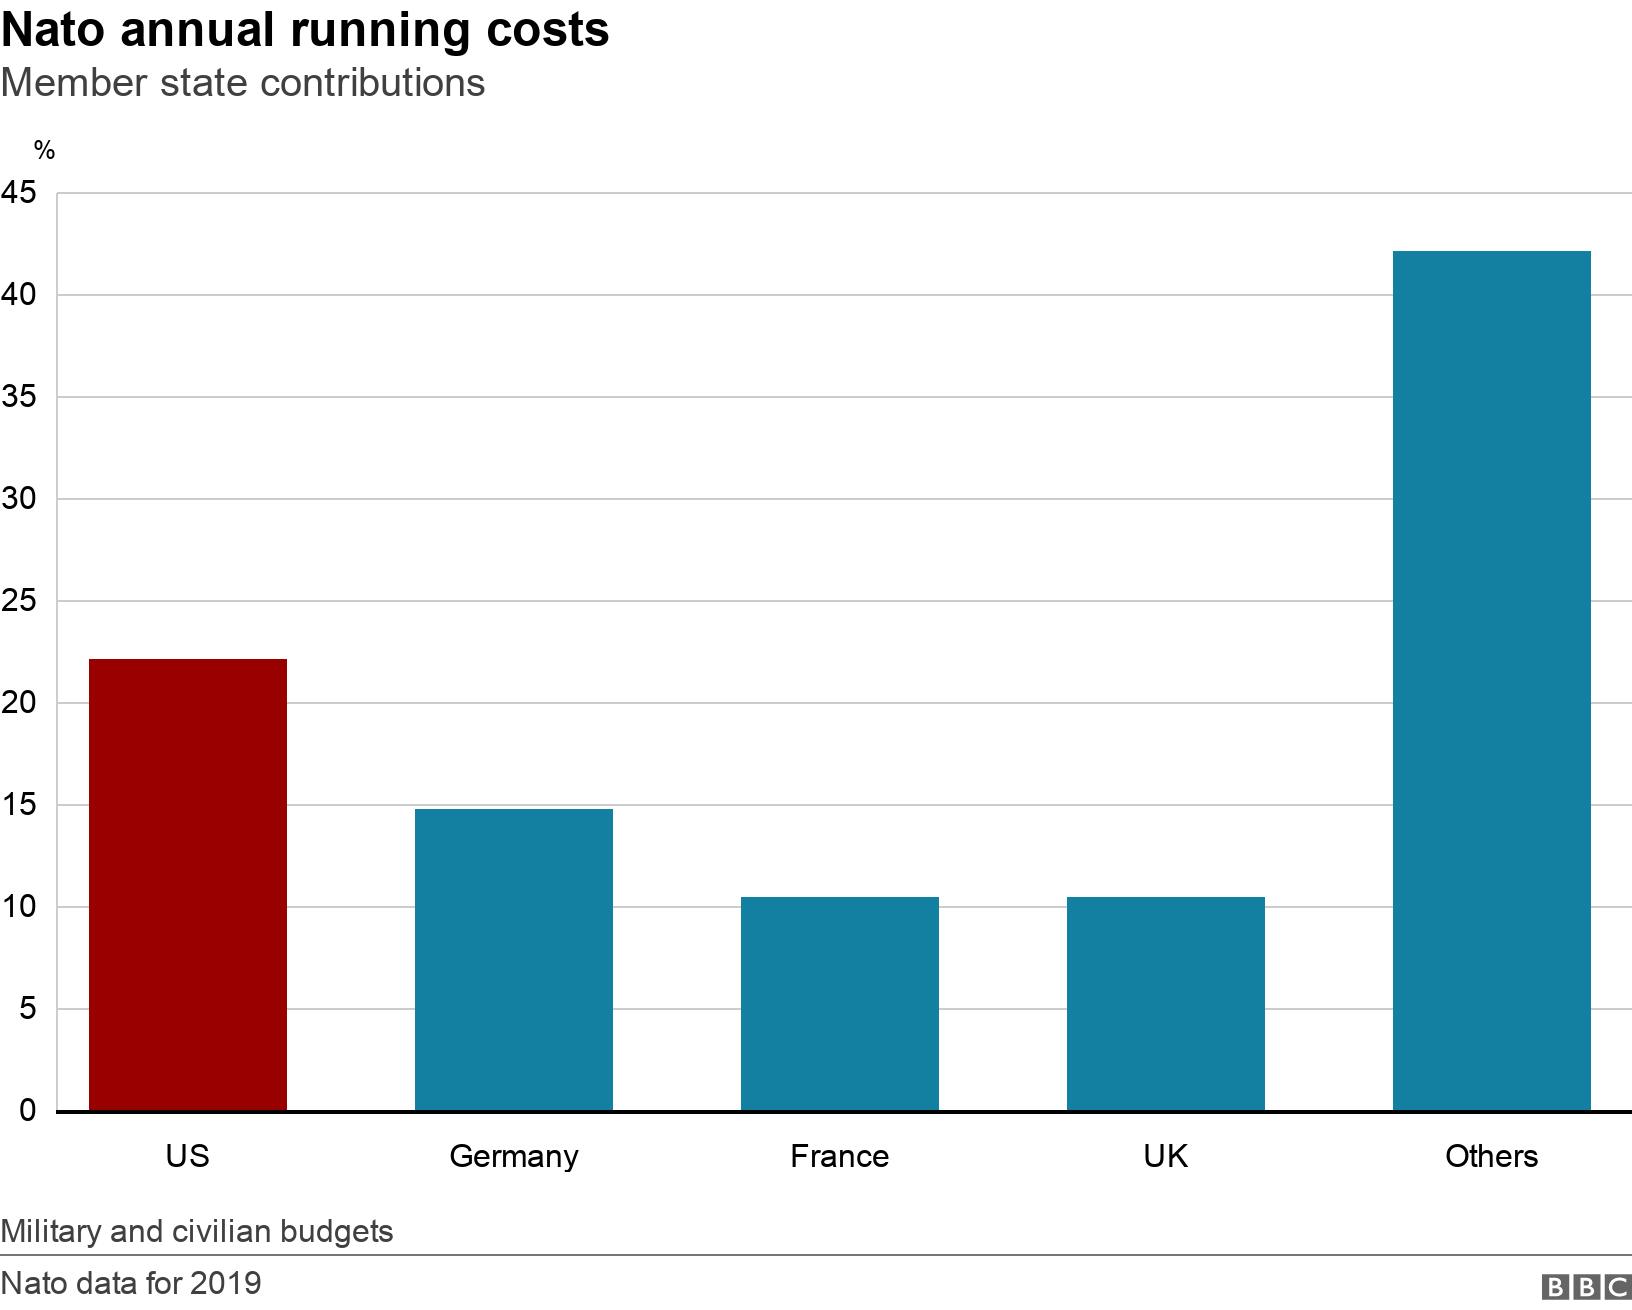 Nato annual running costs. Member state contributions. Shared Nato running costs Military and civilian budgets.